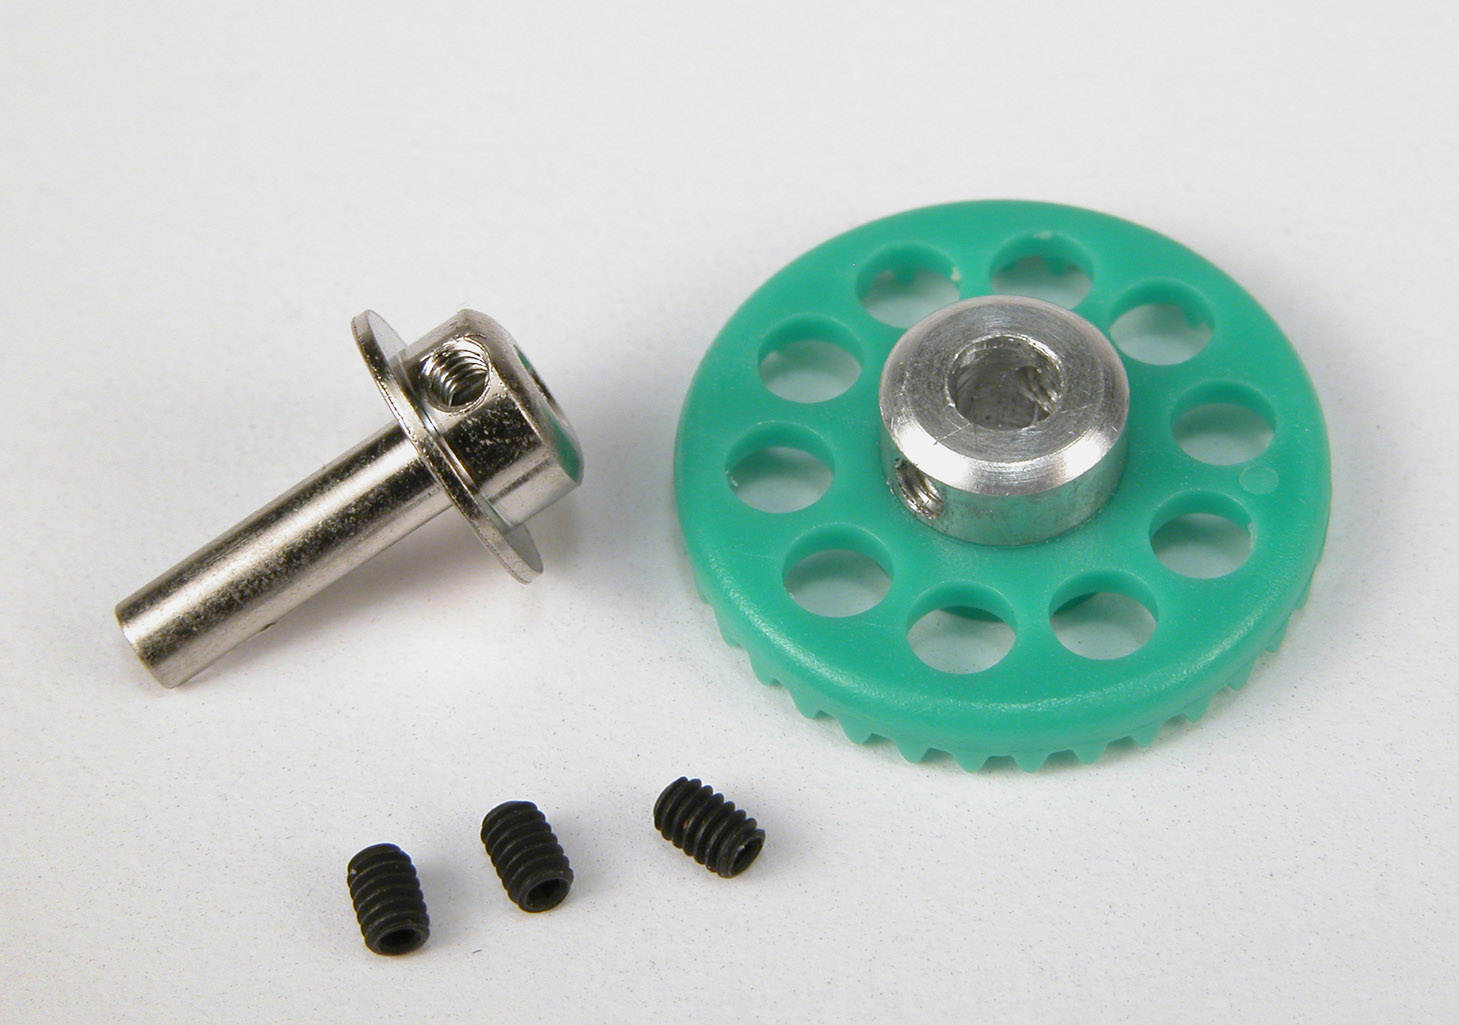 SC-1105 Nylon crown Gear 35t. M50 with 2xM2 screws for 3mm. Axl